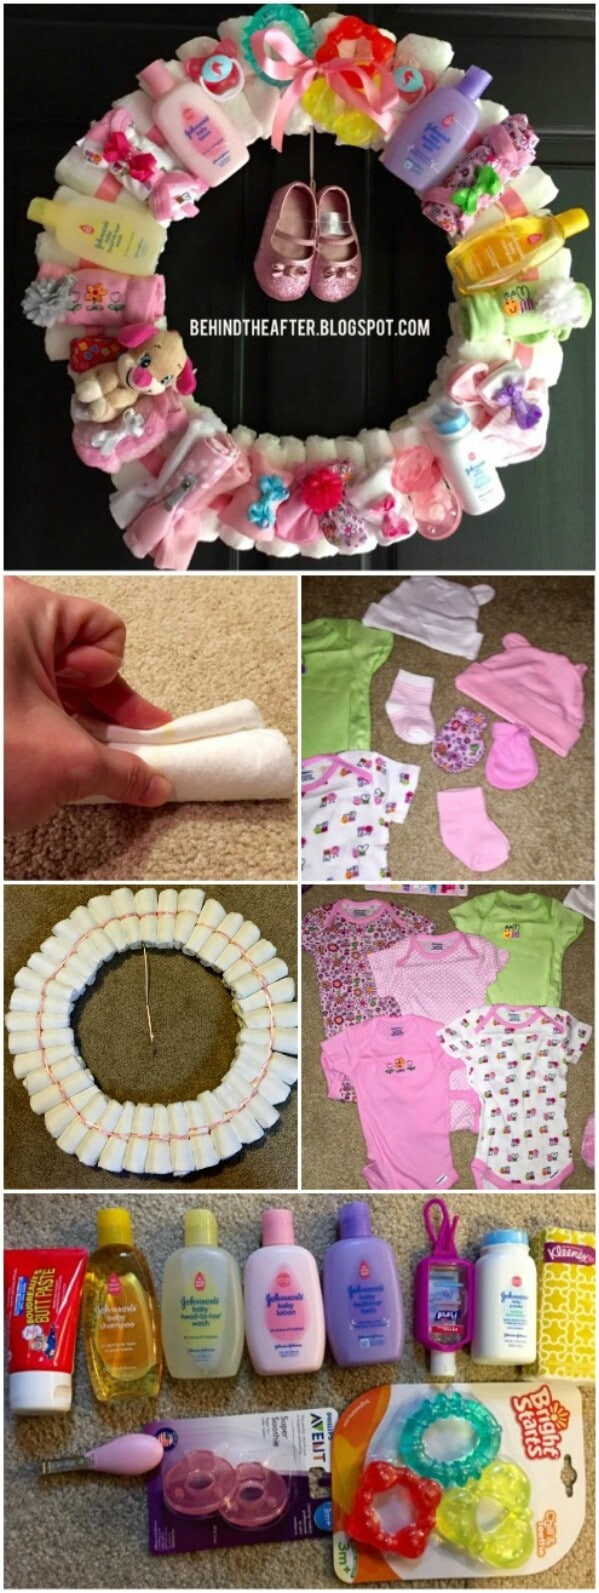 DIY Baby Shower Gifts Ideas
 25 Enchantingly Adorable Baby Shower Gift Ideas That Will